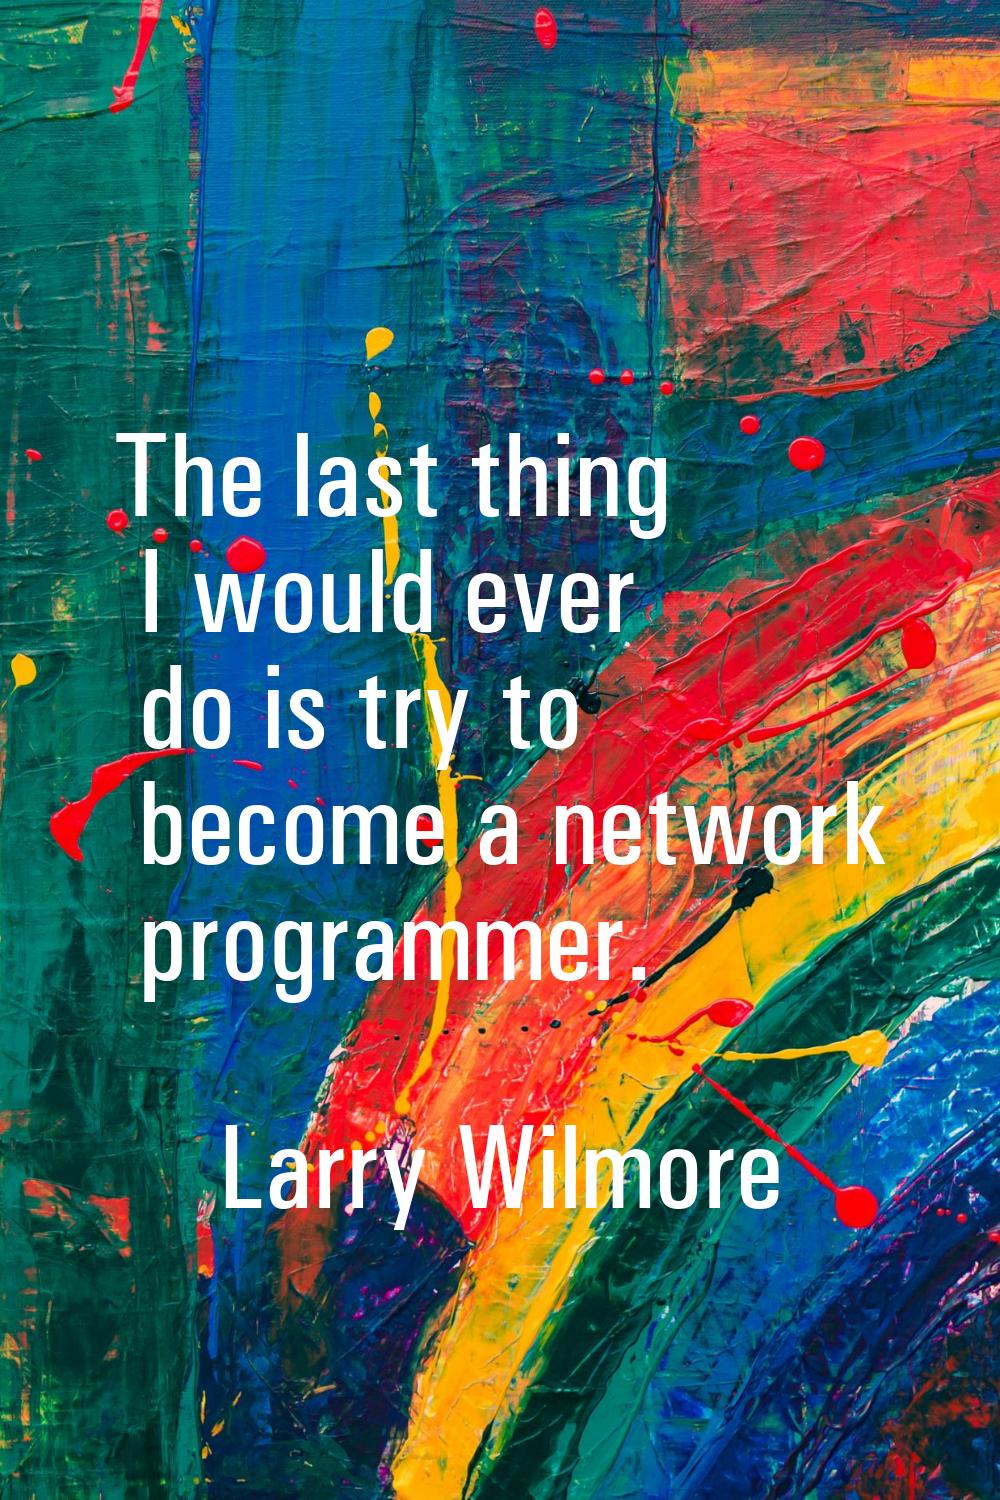 The last thing I would ever do is try to become a network programmer.